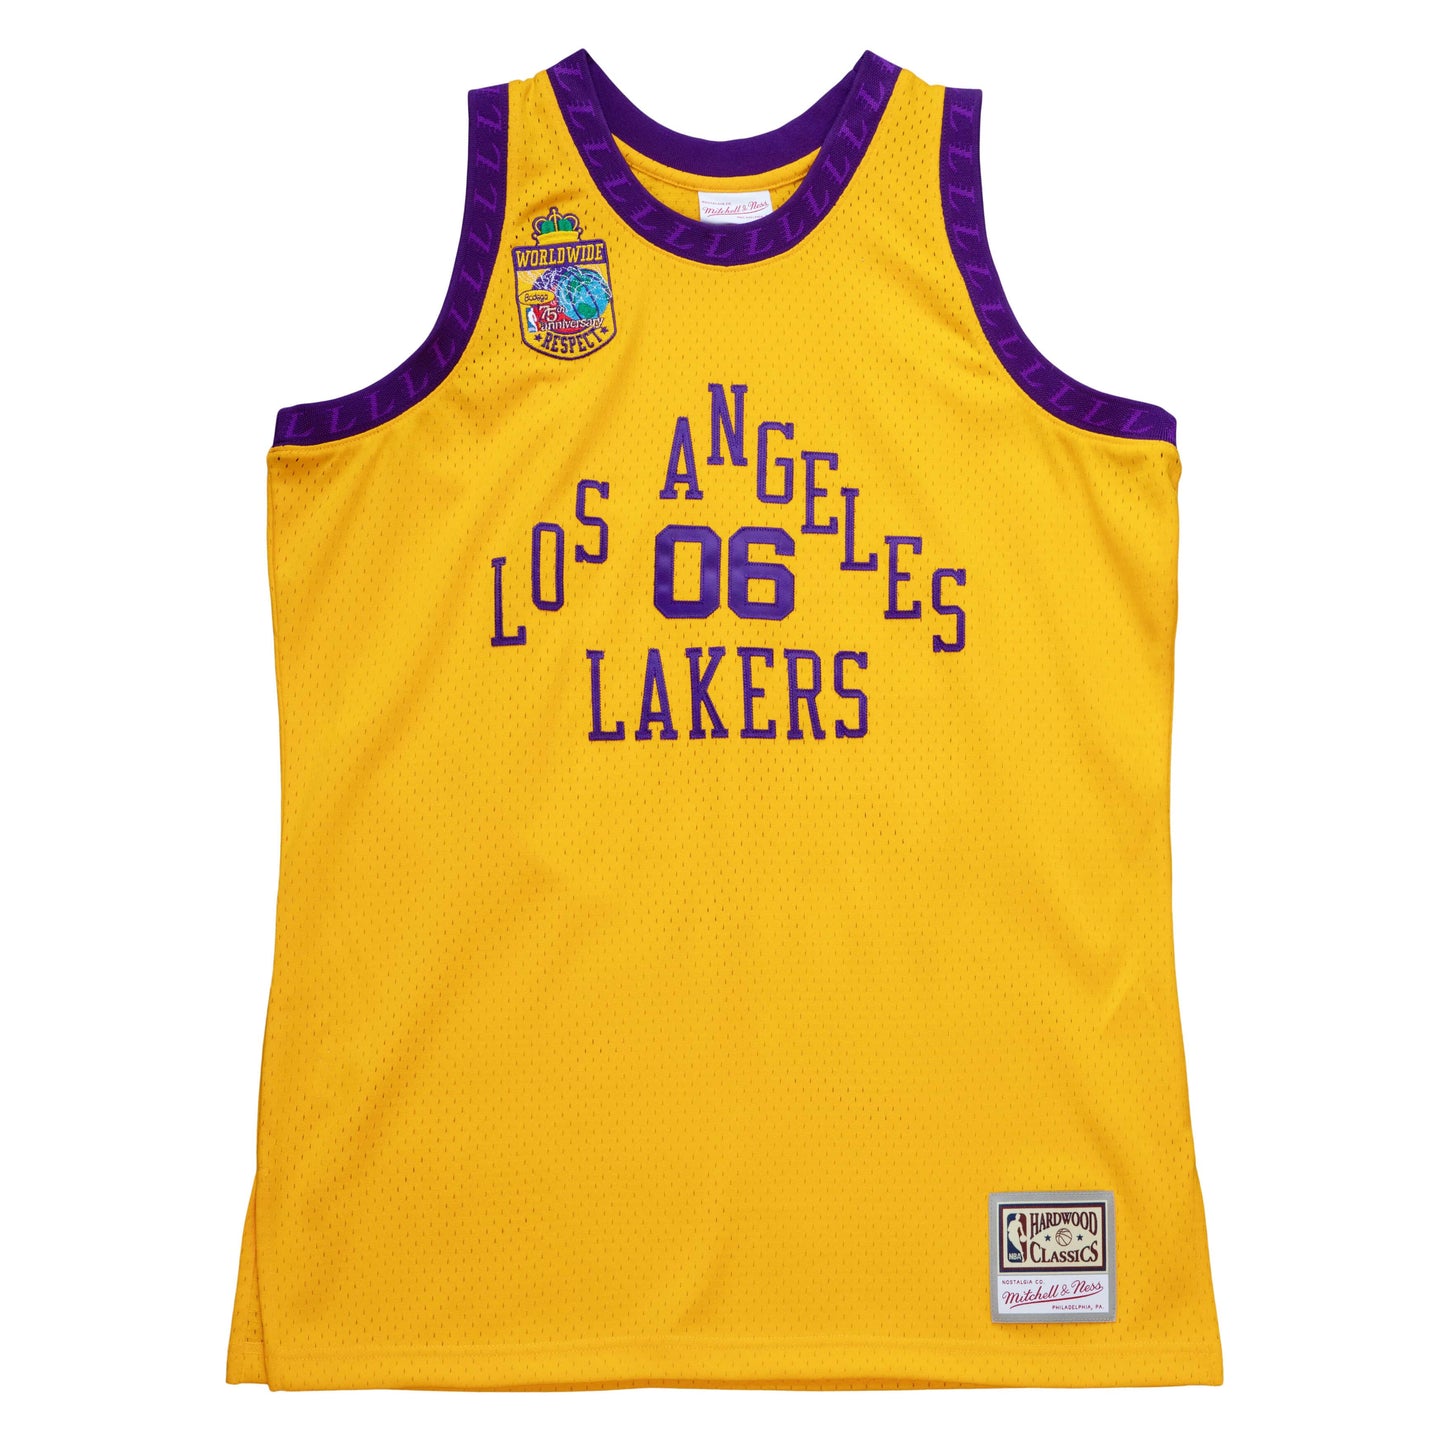 My Towns Bodega Jersey Los Angeles Lakers